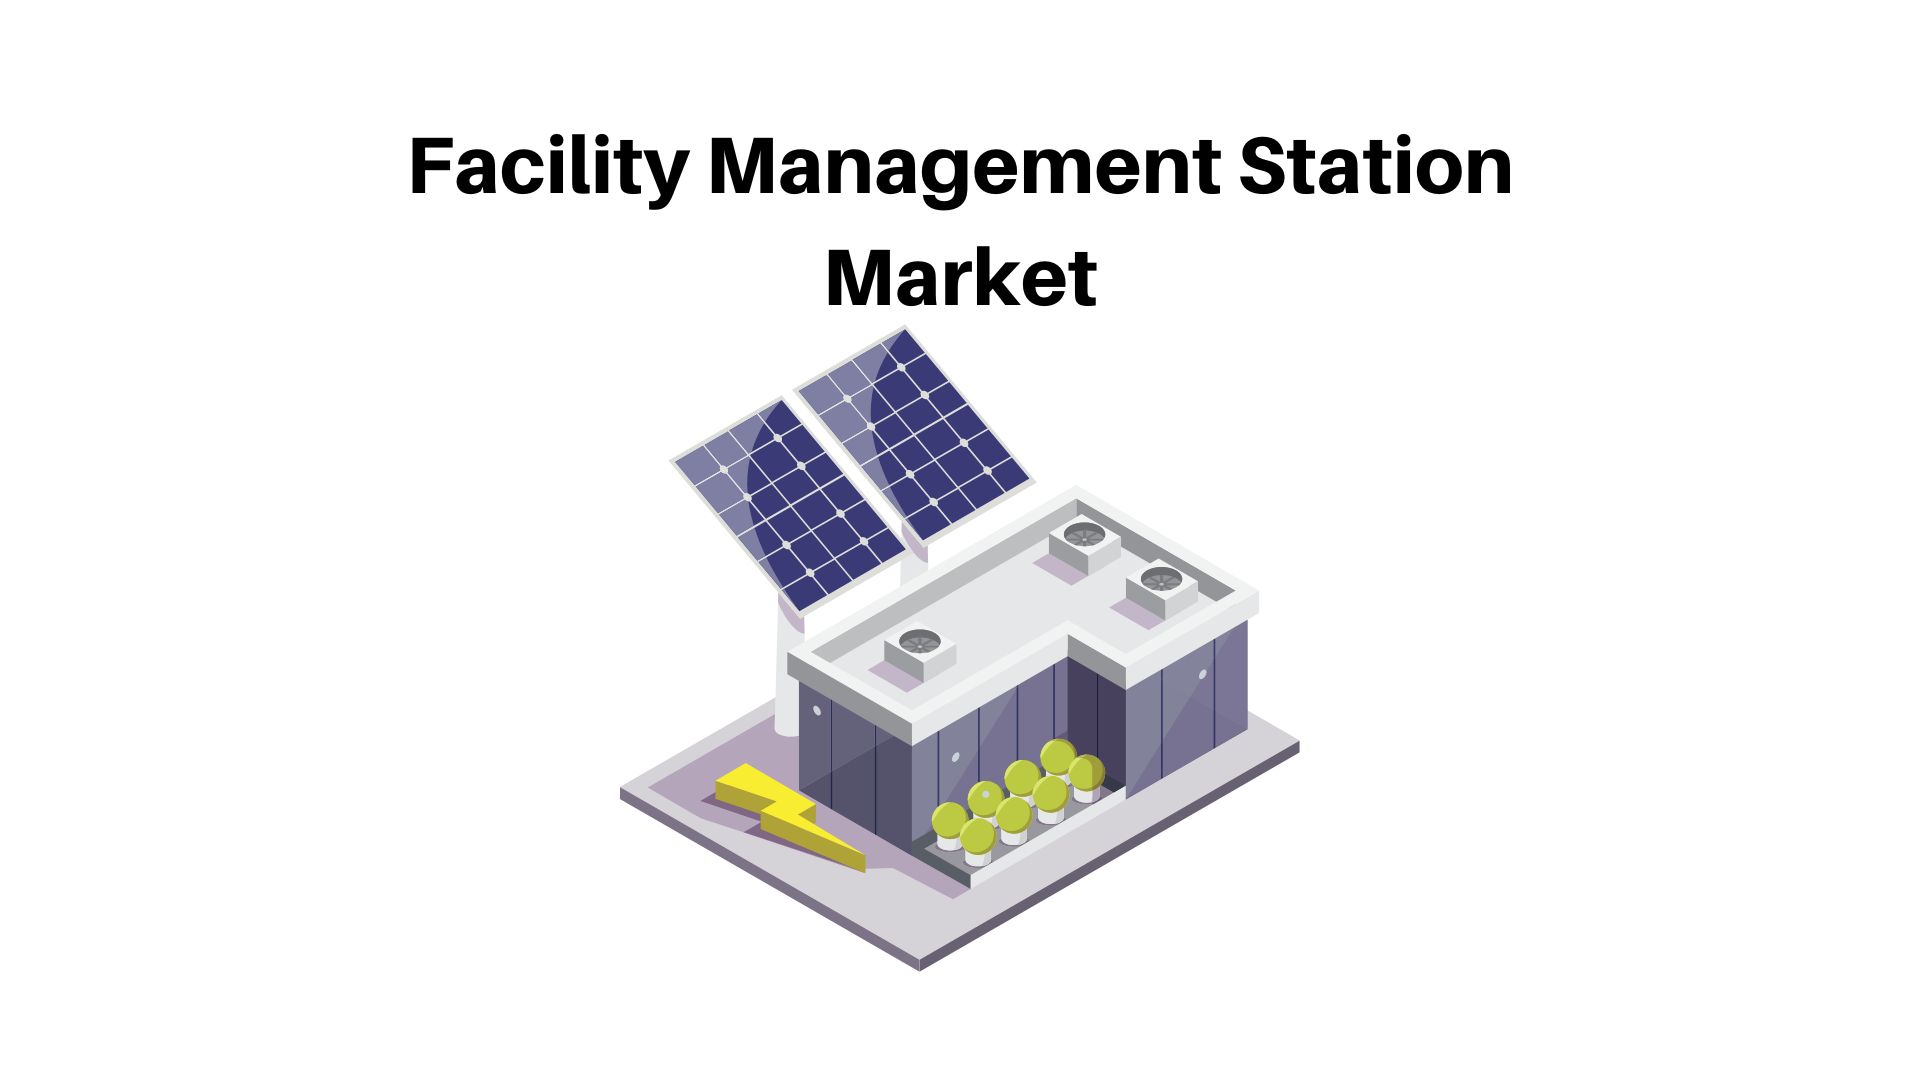 Facility Management Station Market is estimated to be worth of USD 24.09 Billion by 2033